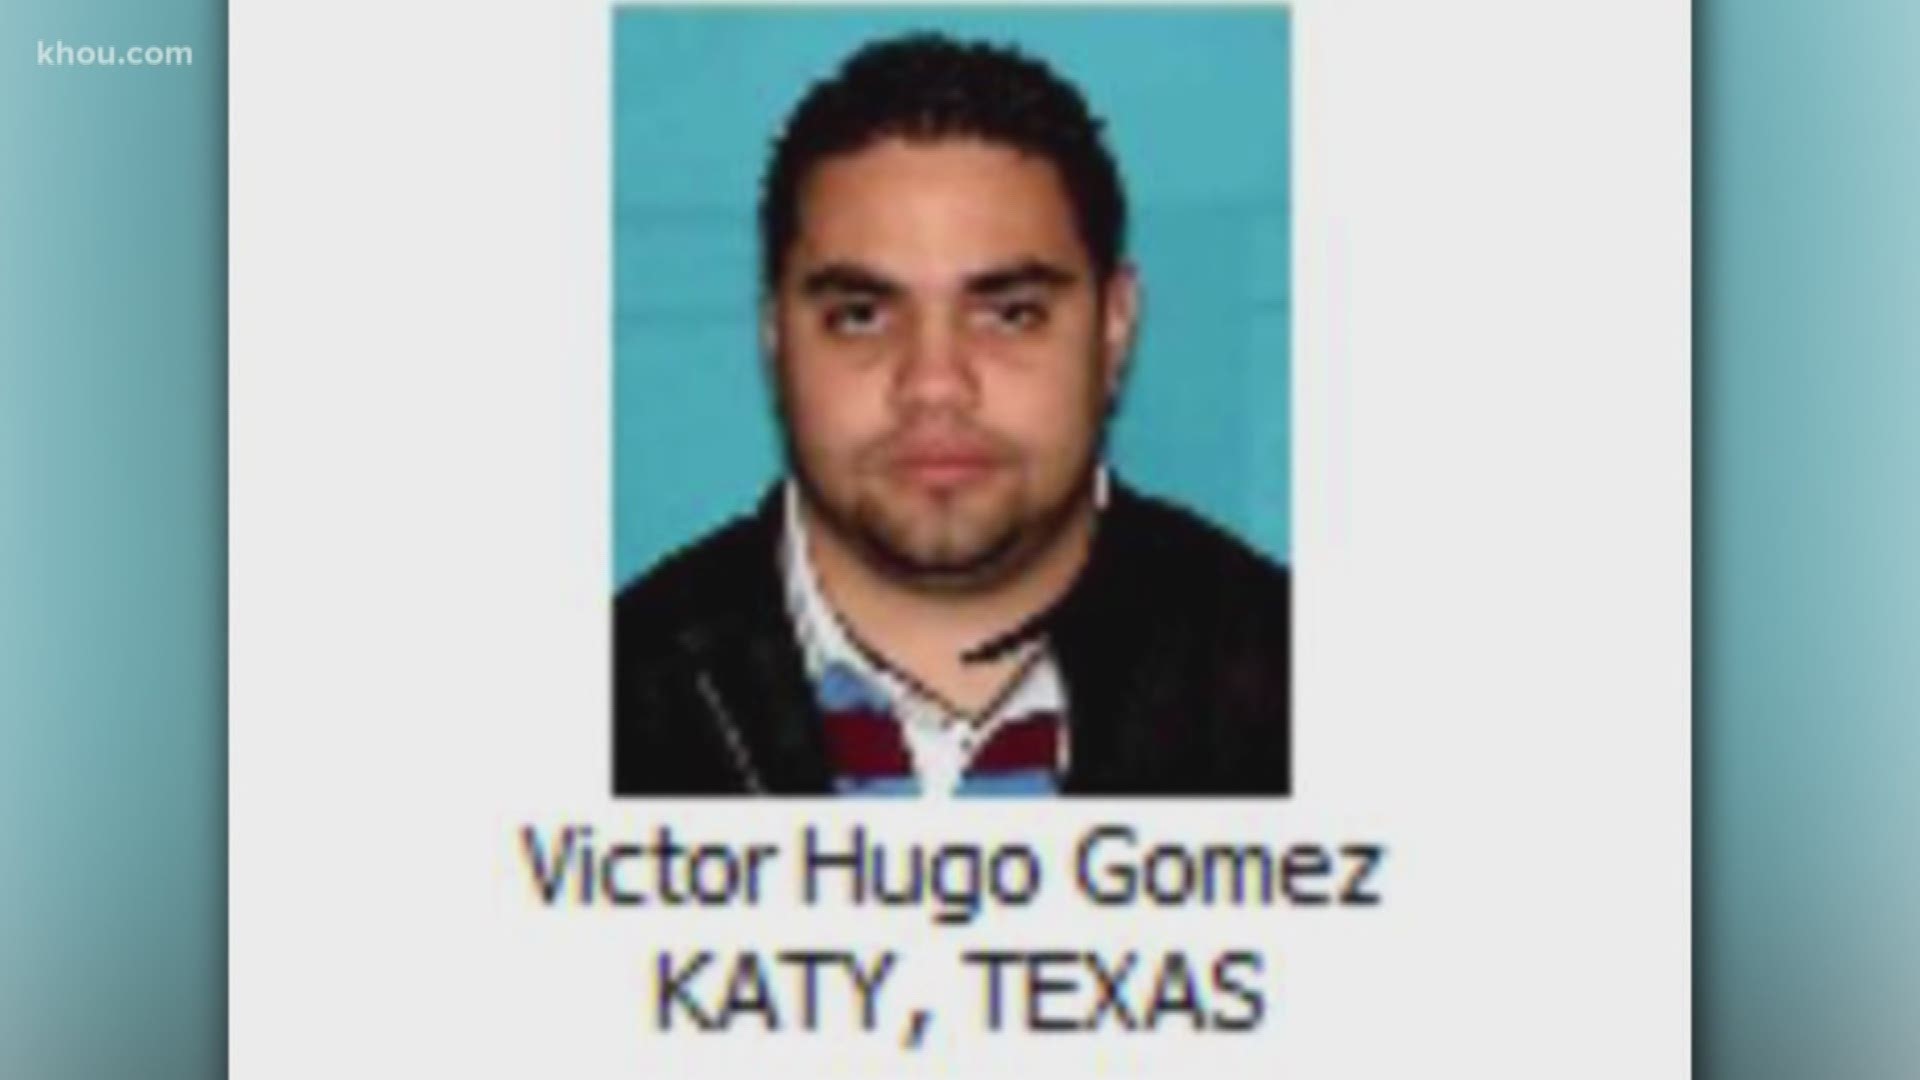 Victor Hugo Gomez is a fugitive wanted by the DEA. Federal agents also believe he was the mastermind behind the shooting, although local authorities said it was a case of mistaken identity.